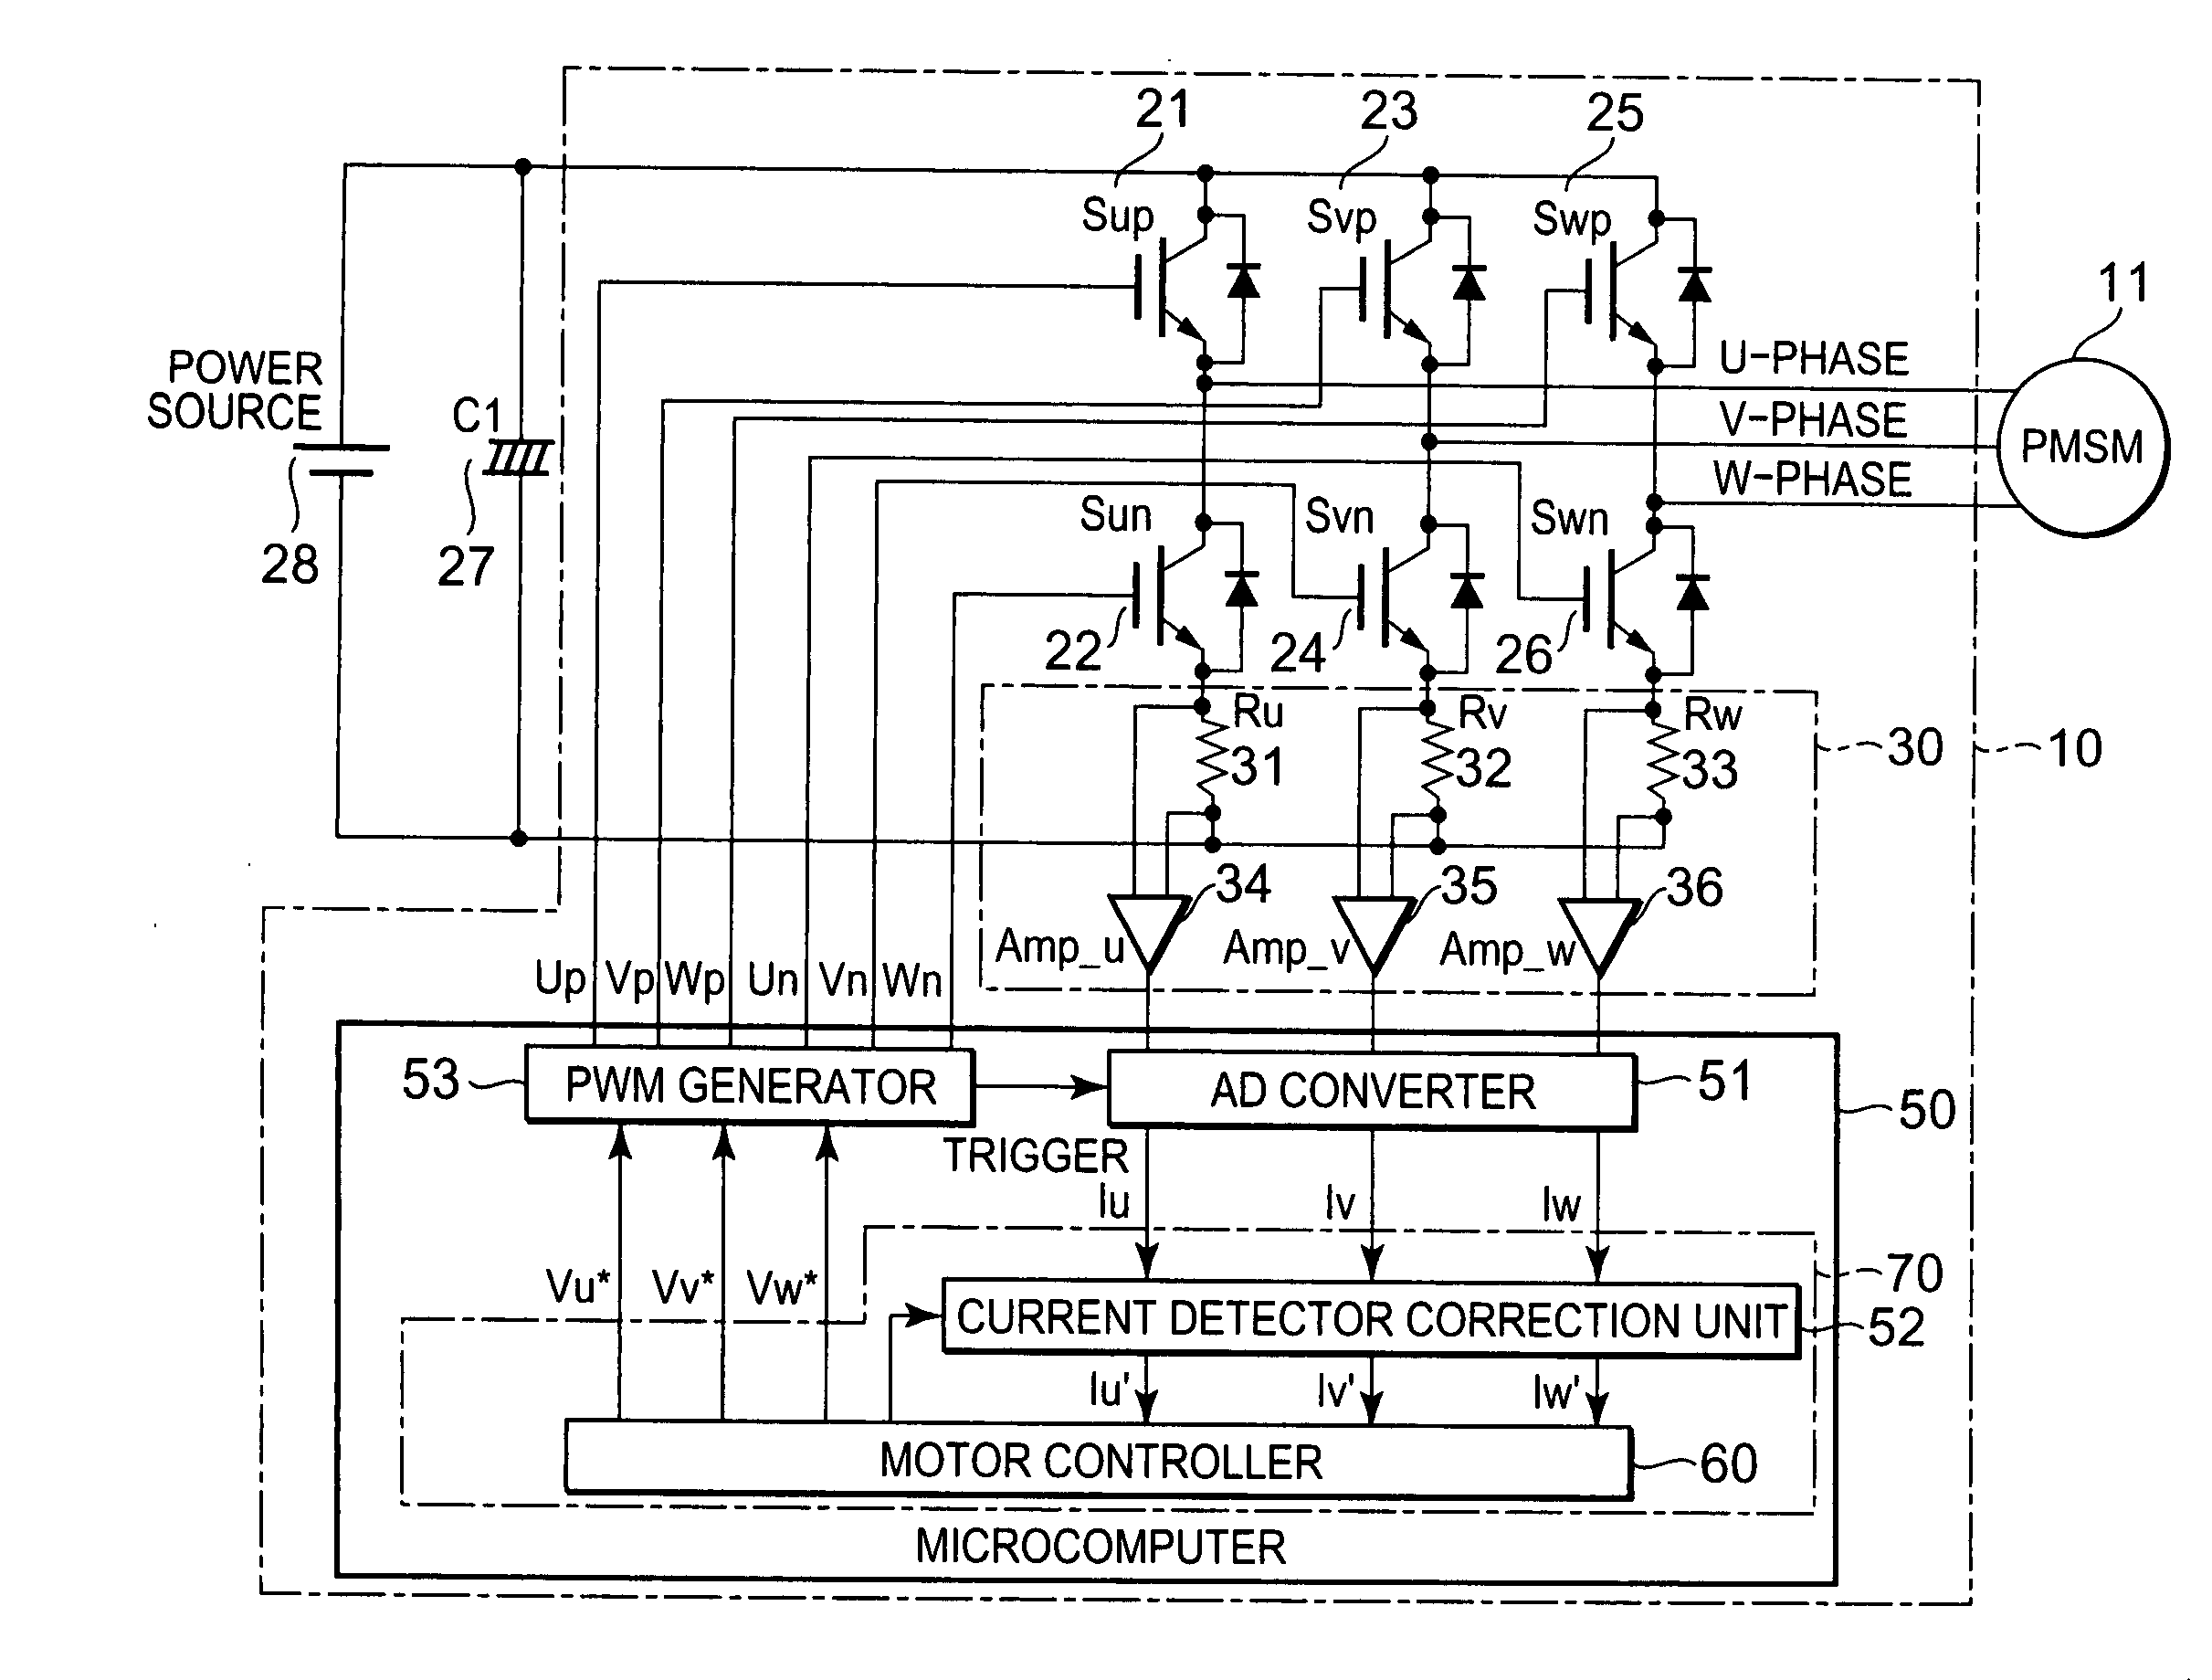 Inverter apparatus and a semiconductor device used for the same